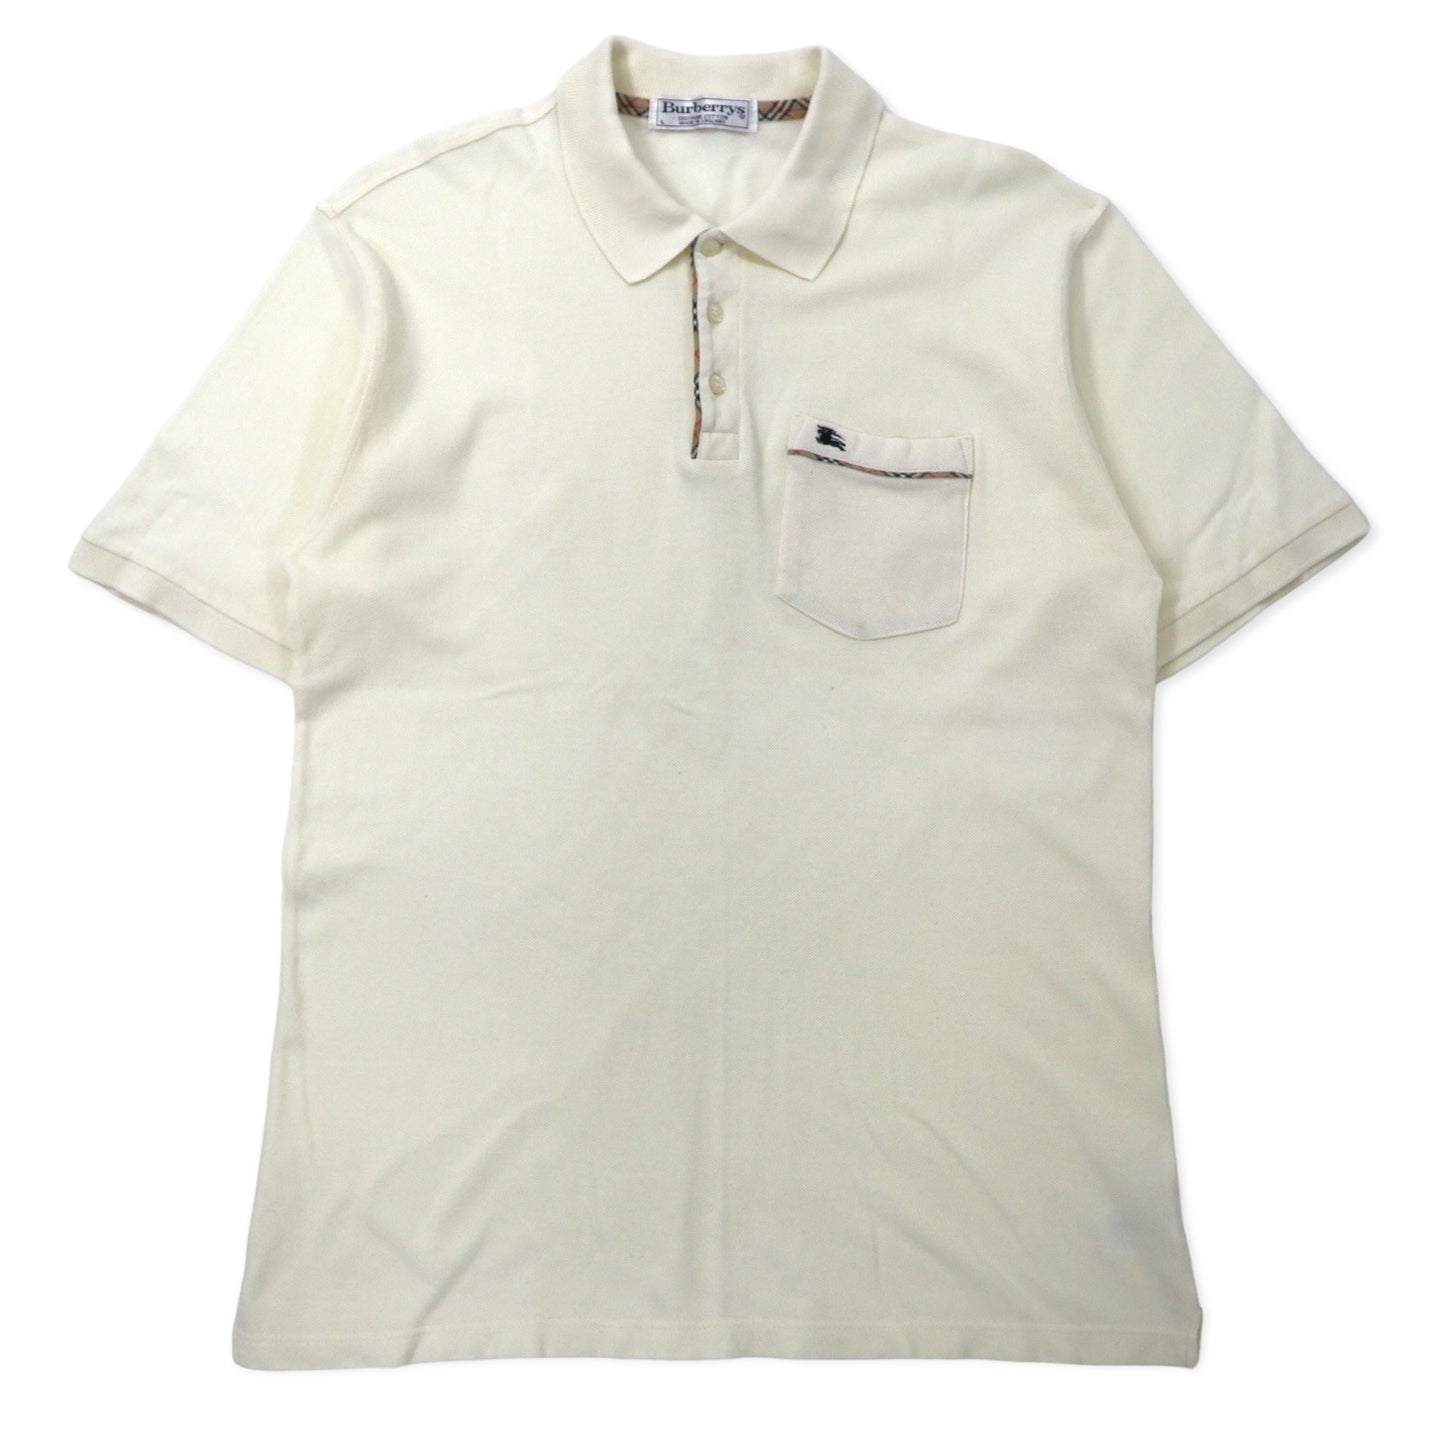 Burberrys England Made Checked Switch Polo Shirt L Cream Cotton 